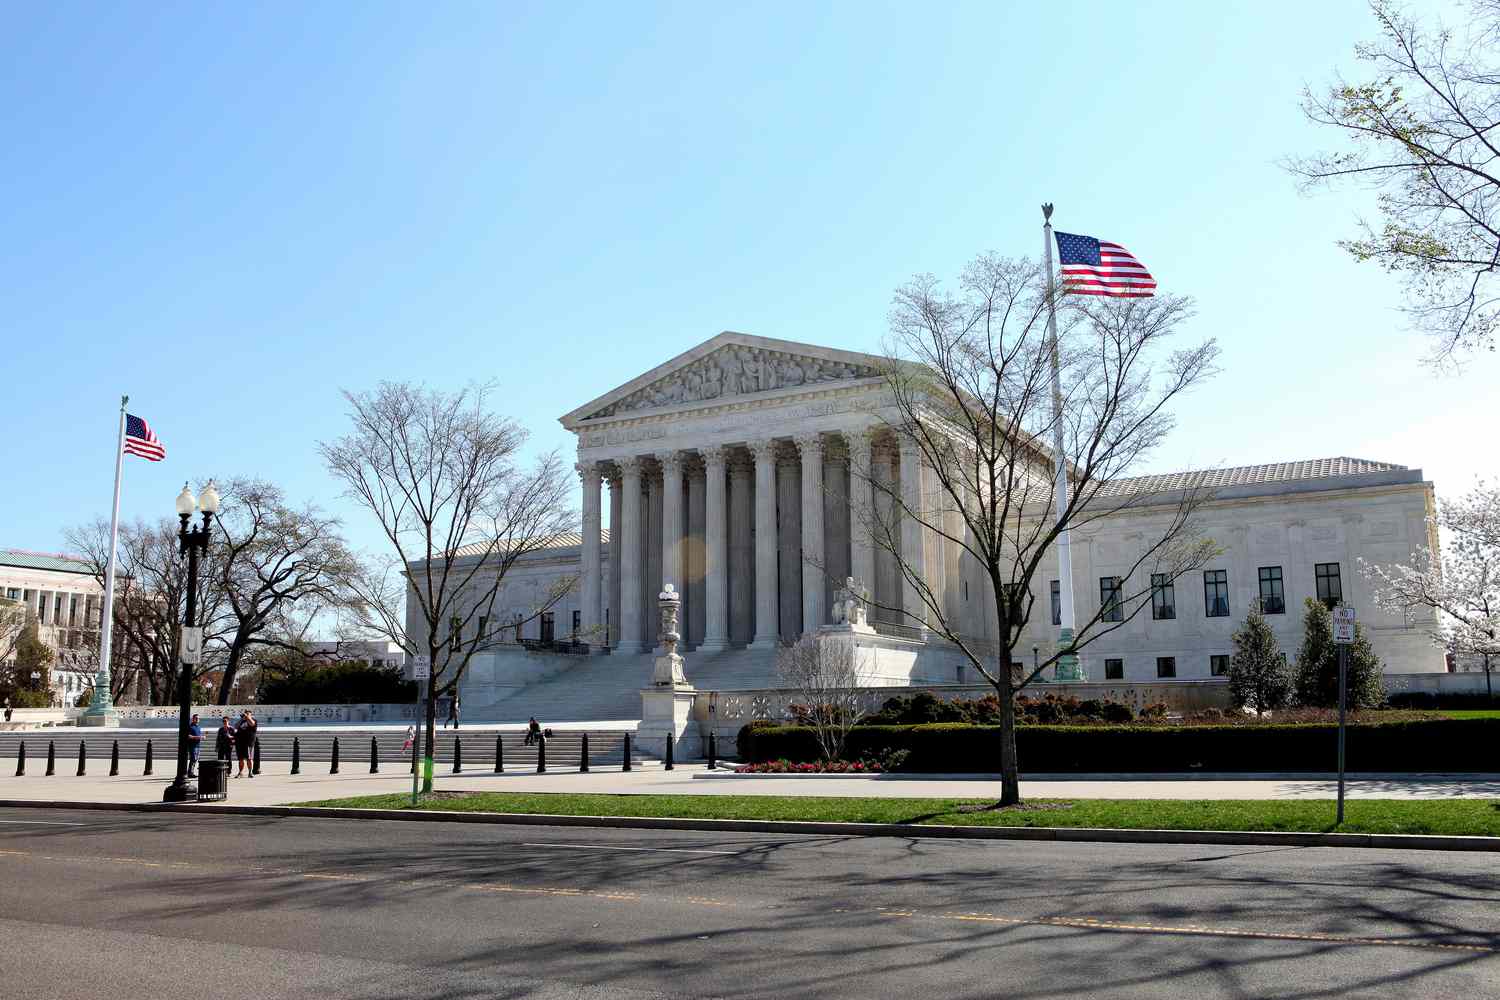 Image of the Supreme Court building with text "Supreme Court Upholds Trump's Right to Run in 2024"